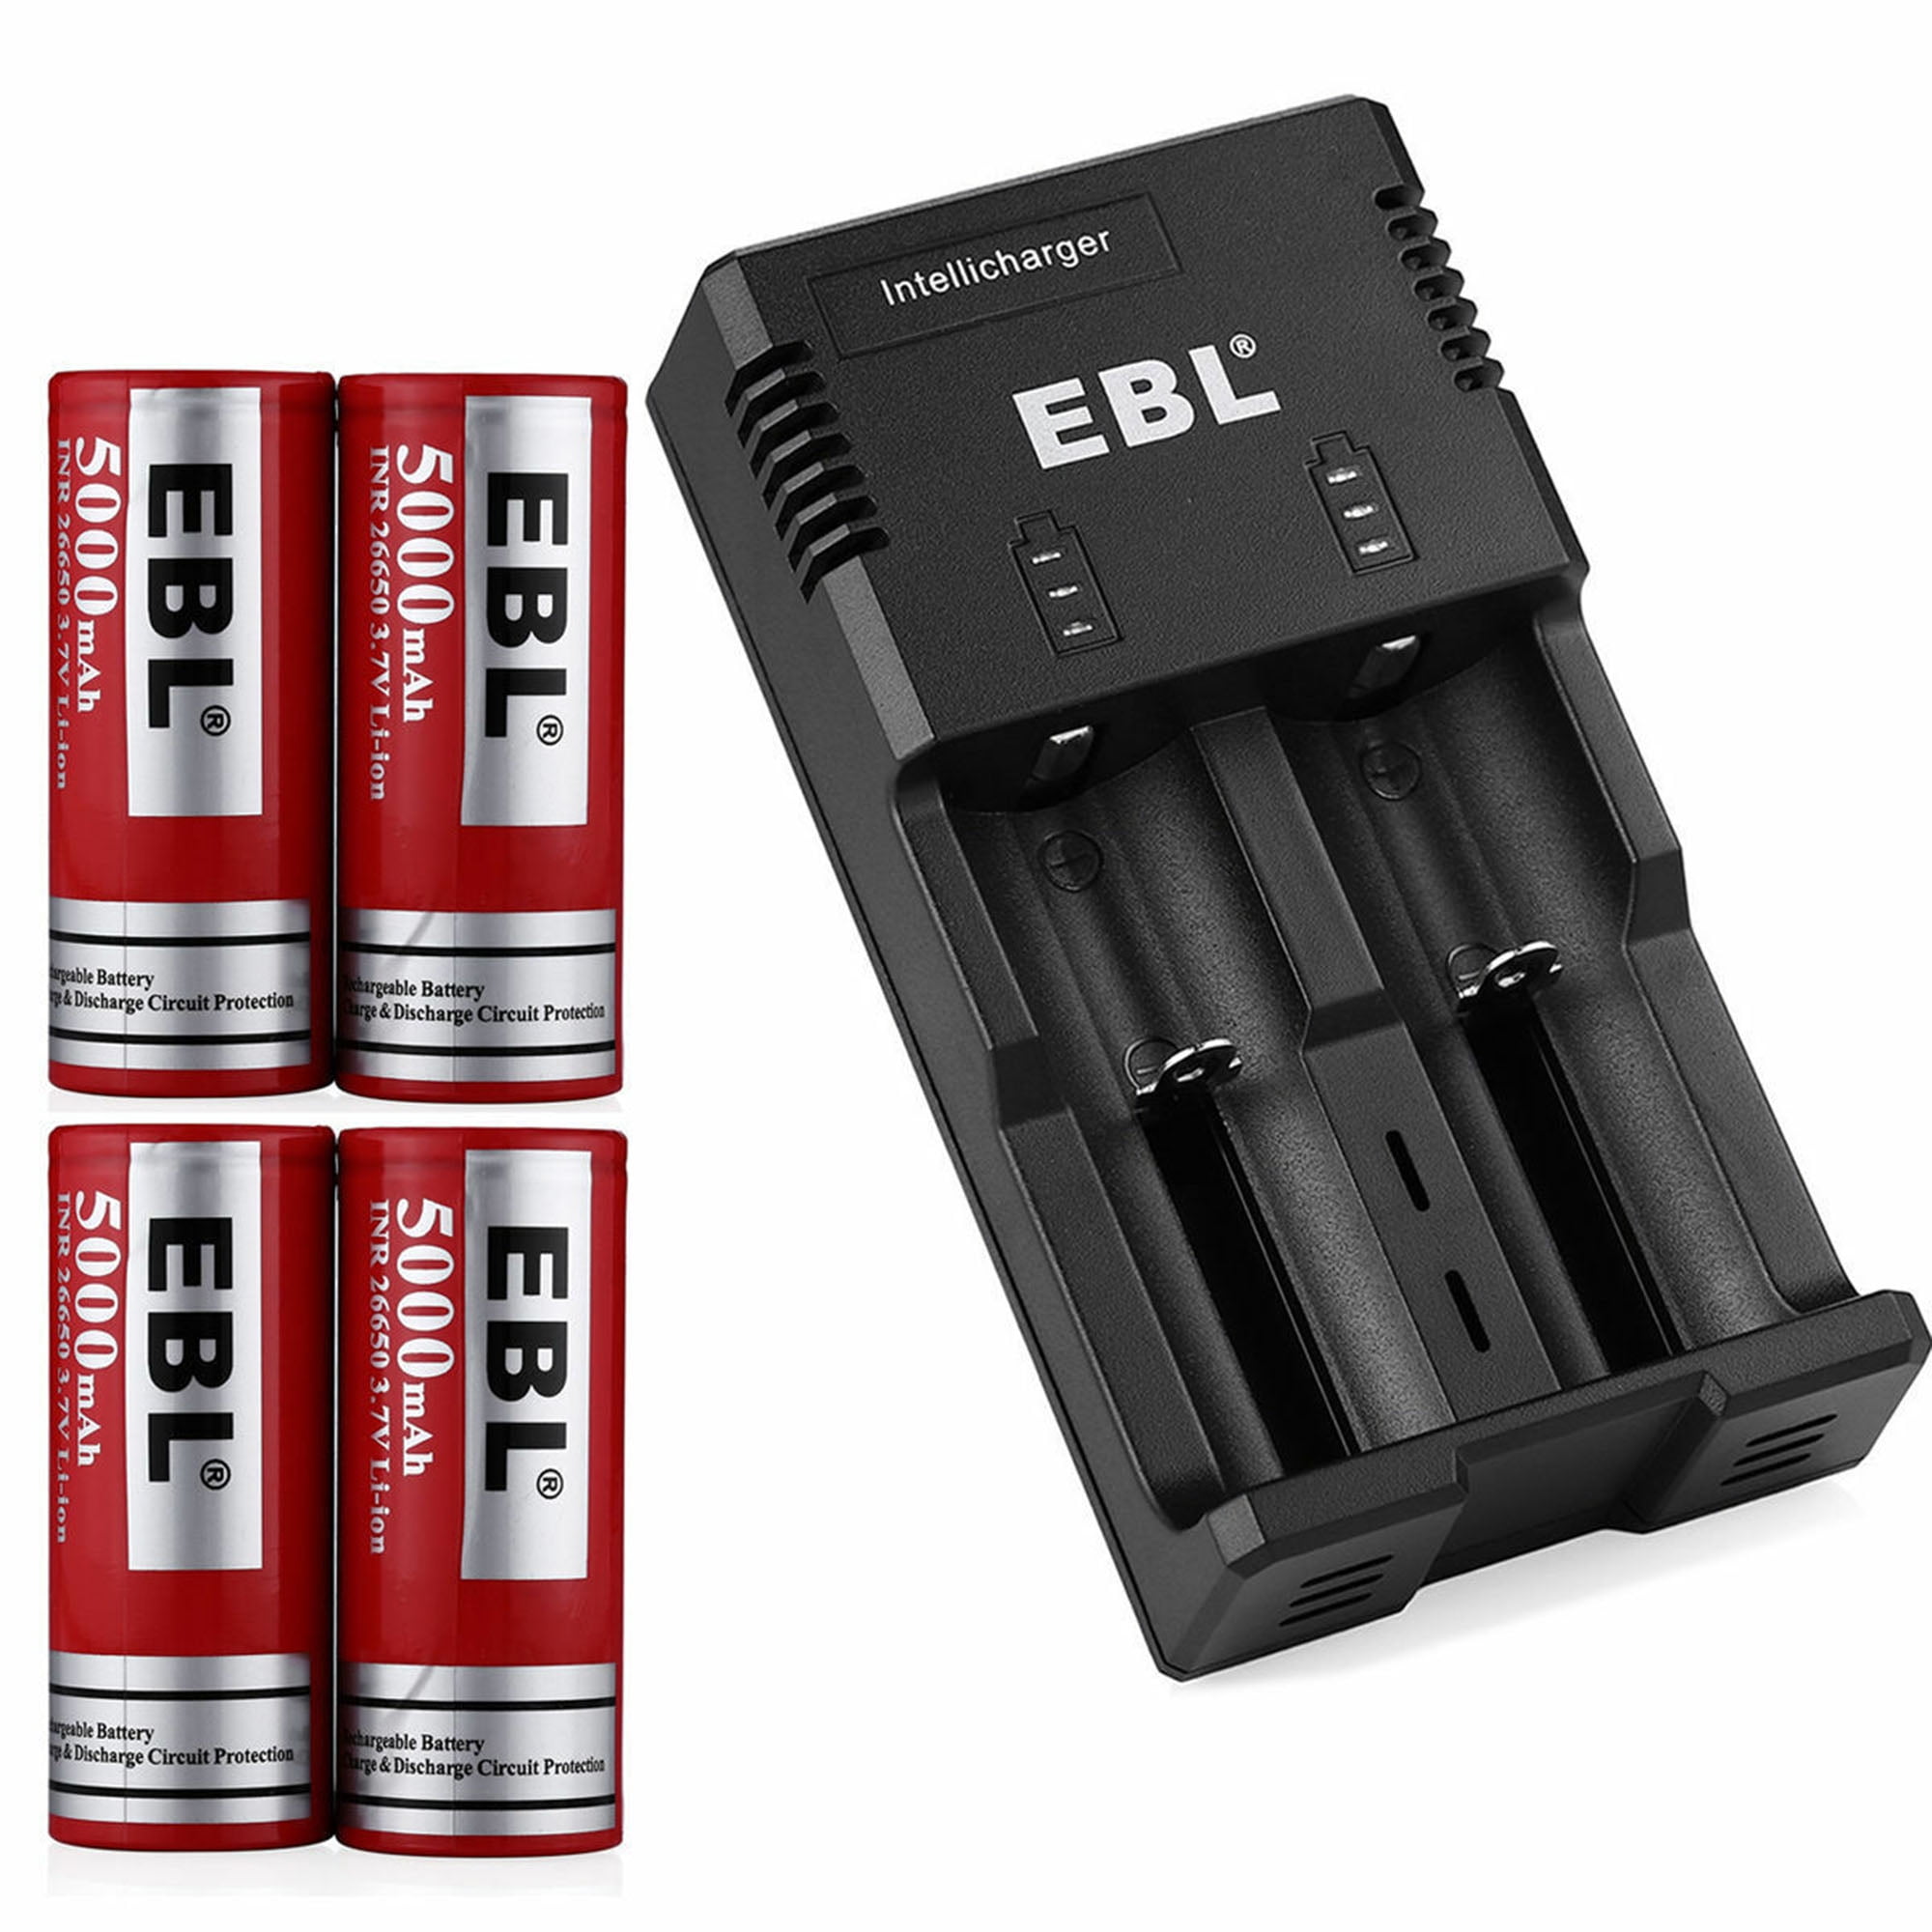 EBL USB Individual AA AAA Battery Charger 40 Minutes Fast Charging for Ni-MH AA AAA Rechargeable Batteries